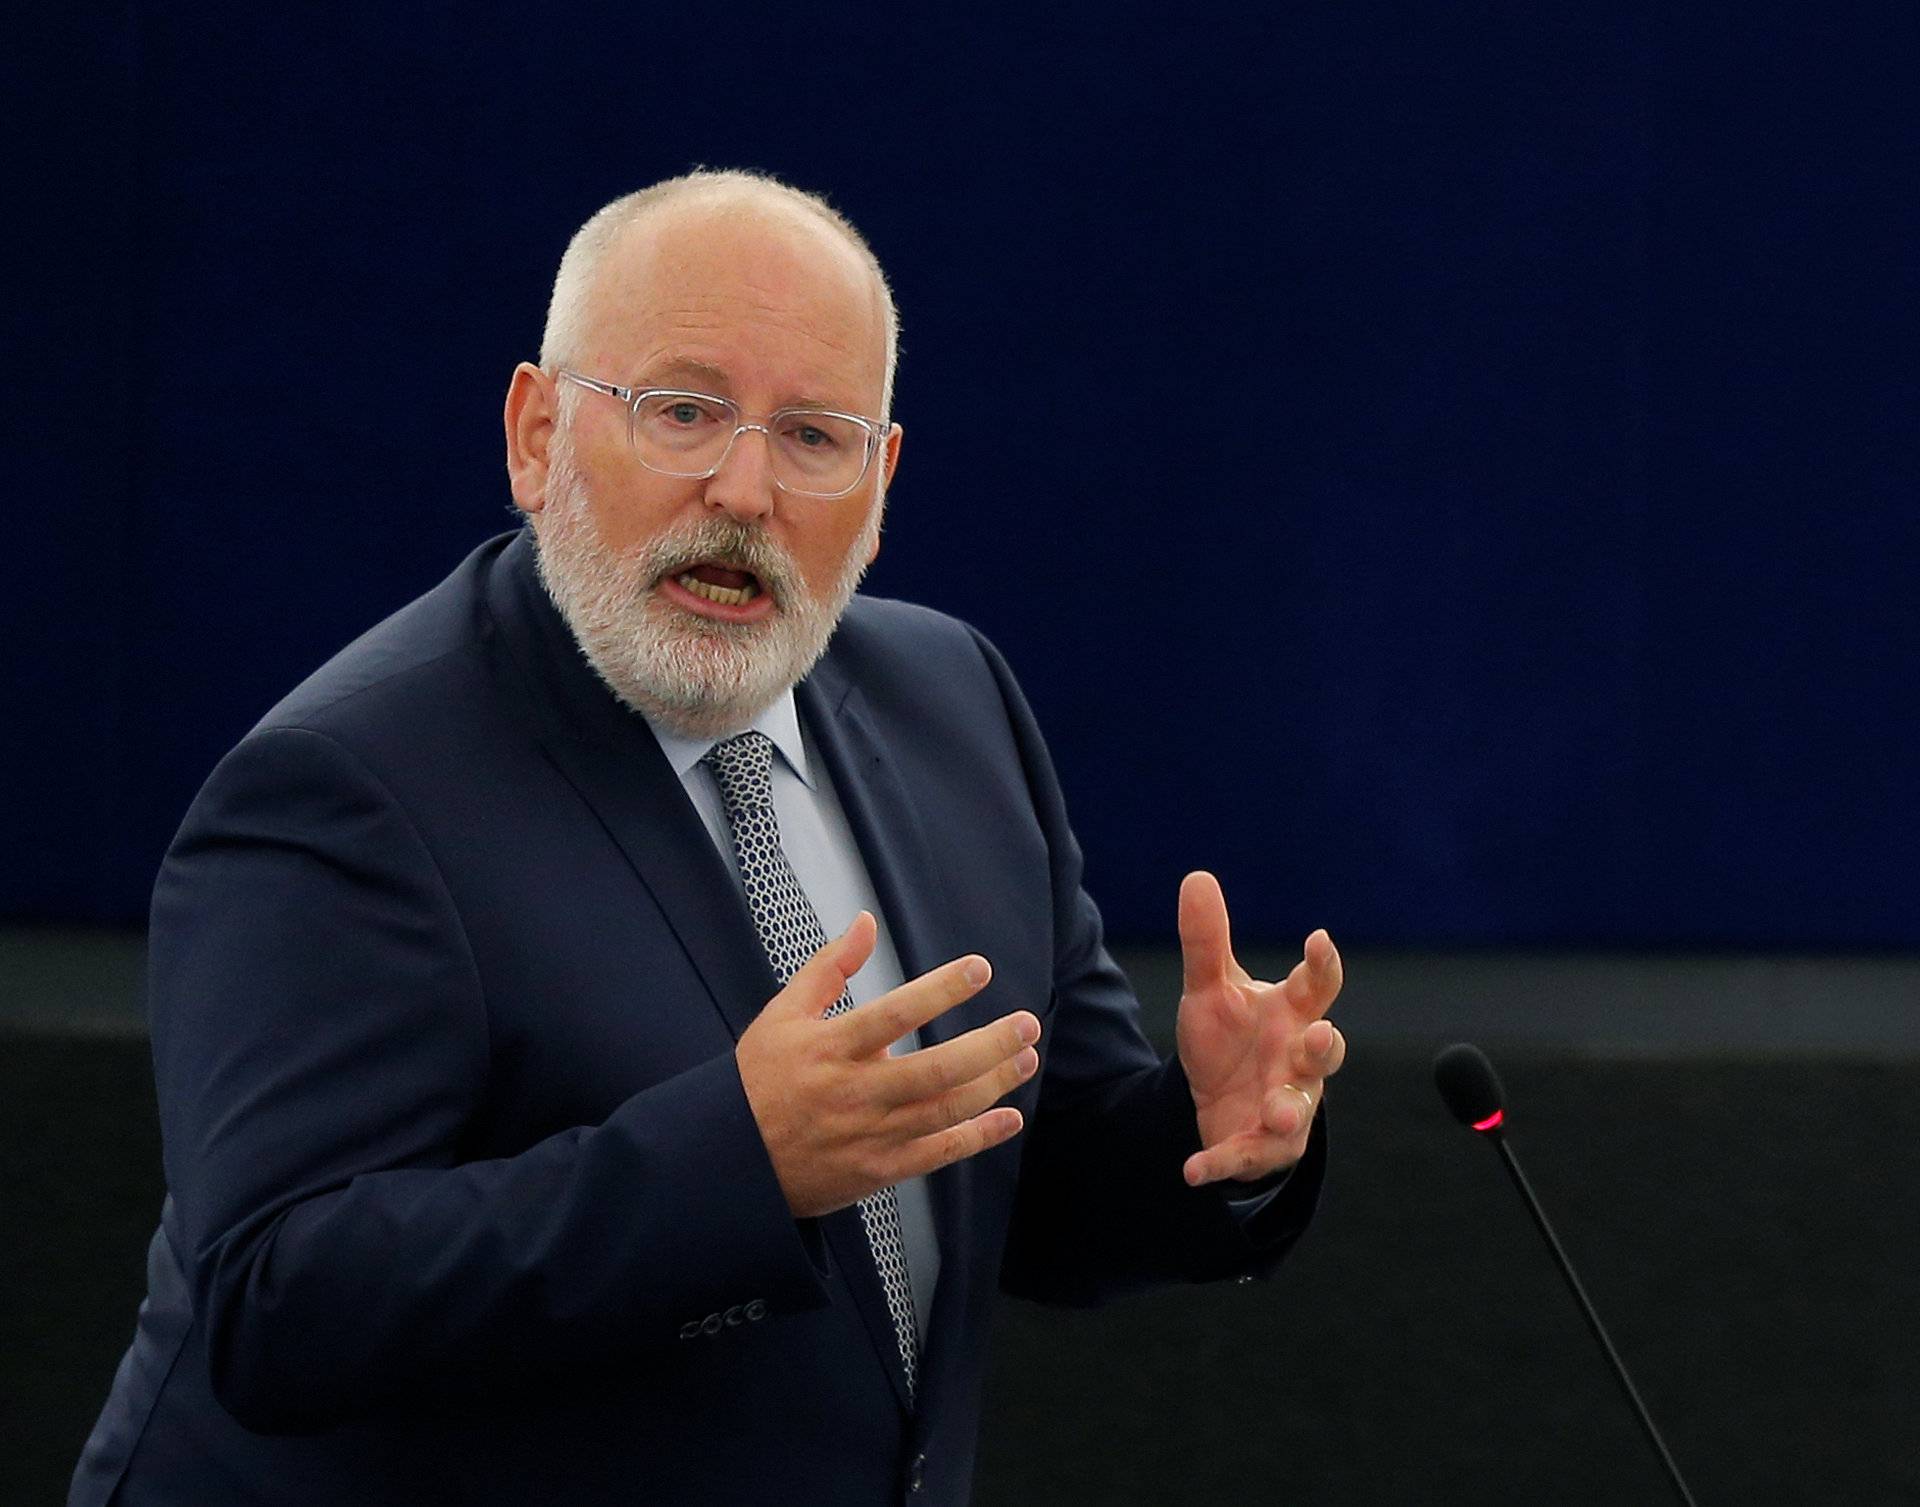 European Commission First Vice-President Timmermans delivers a speech during a debate on the Future of Europe at the European Parliament in Strasbourg